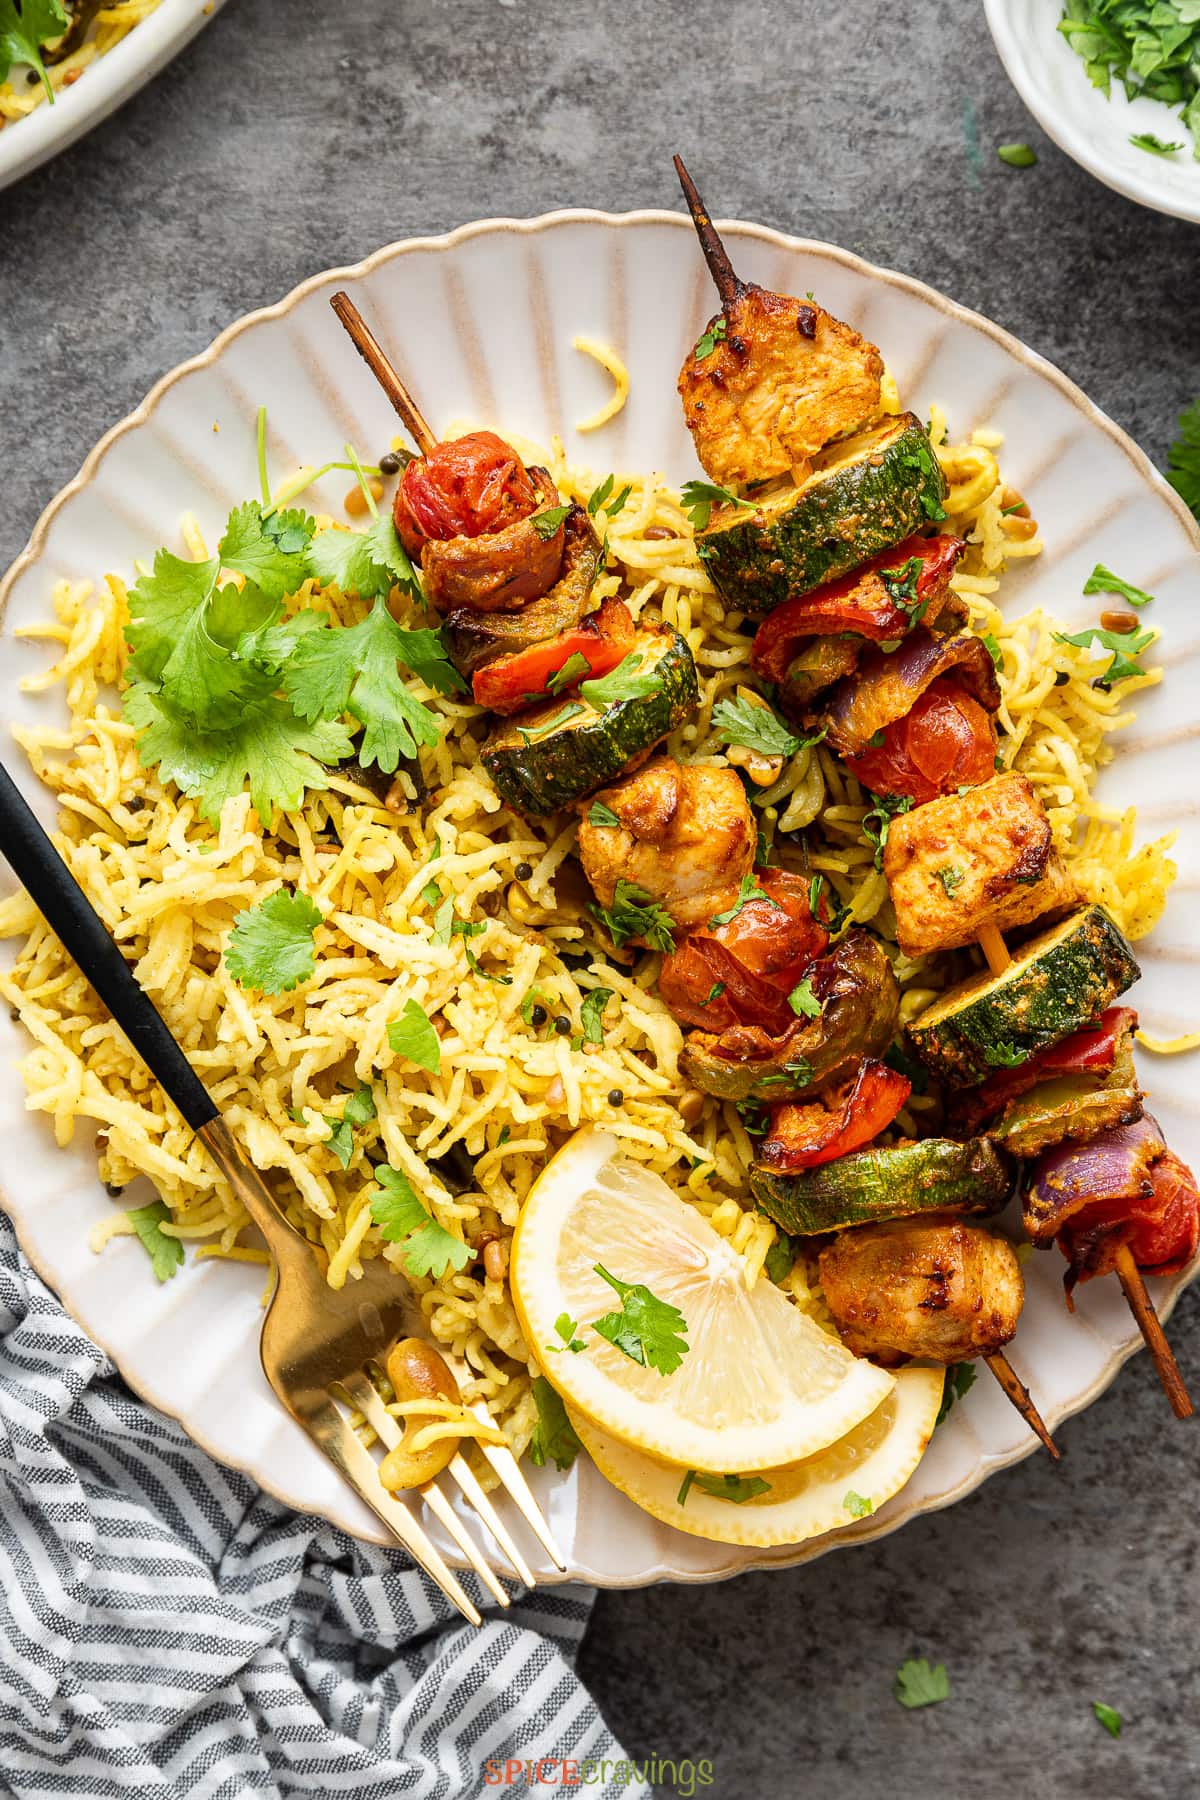 Two shish kebab skewers on a plate of yellow rice